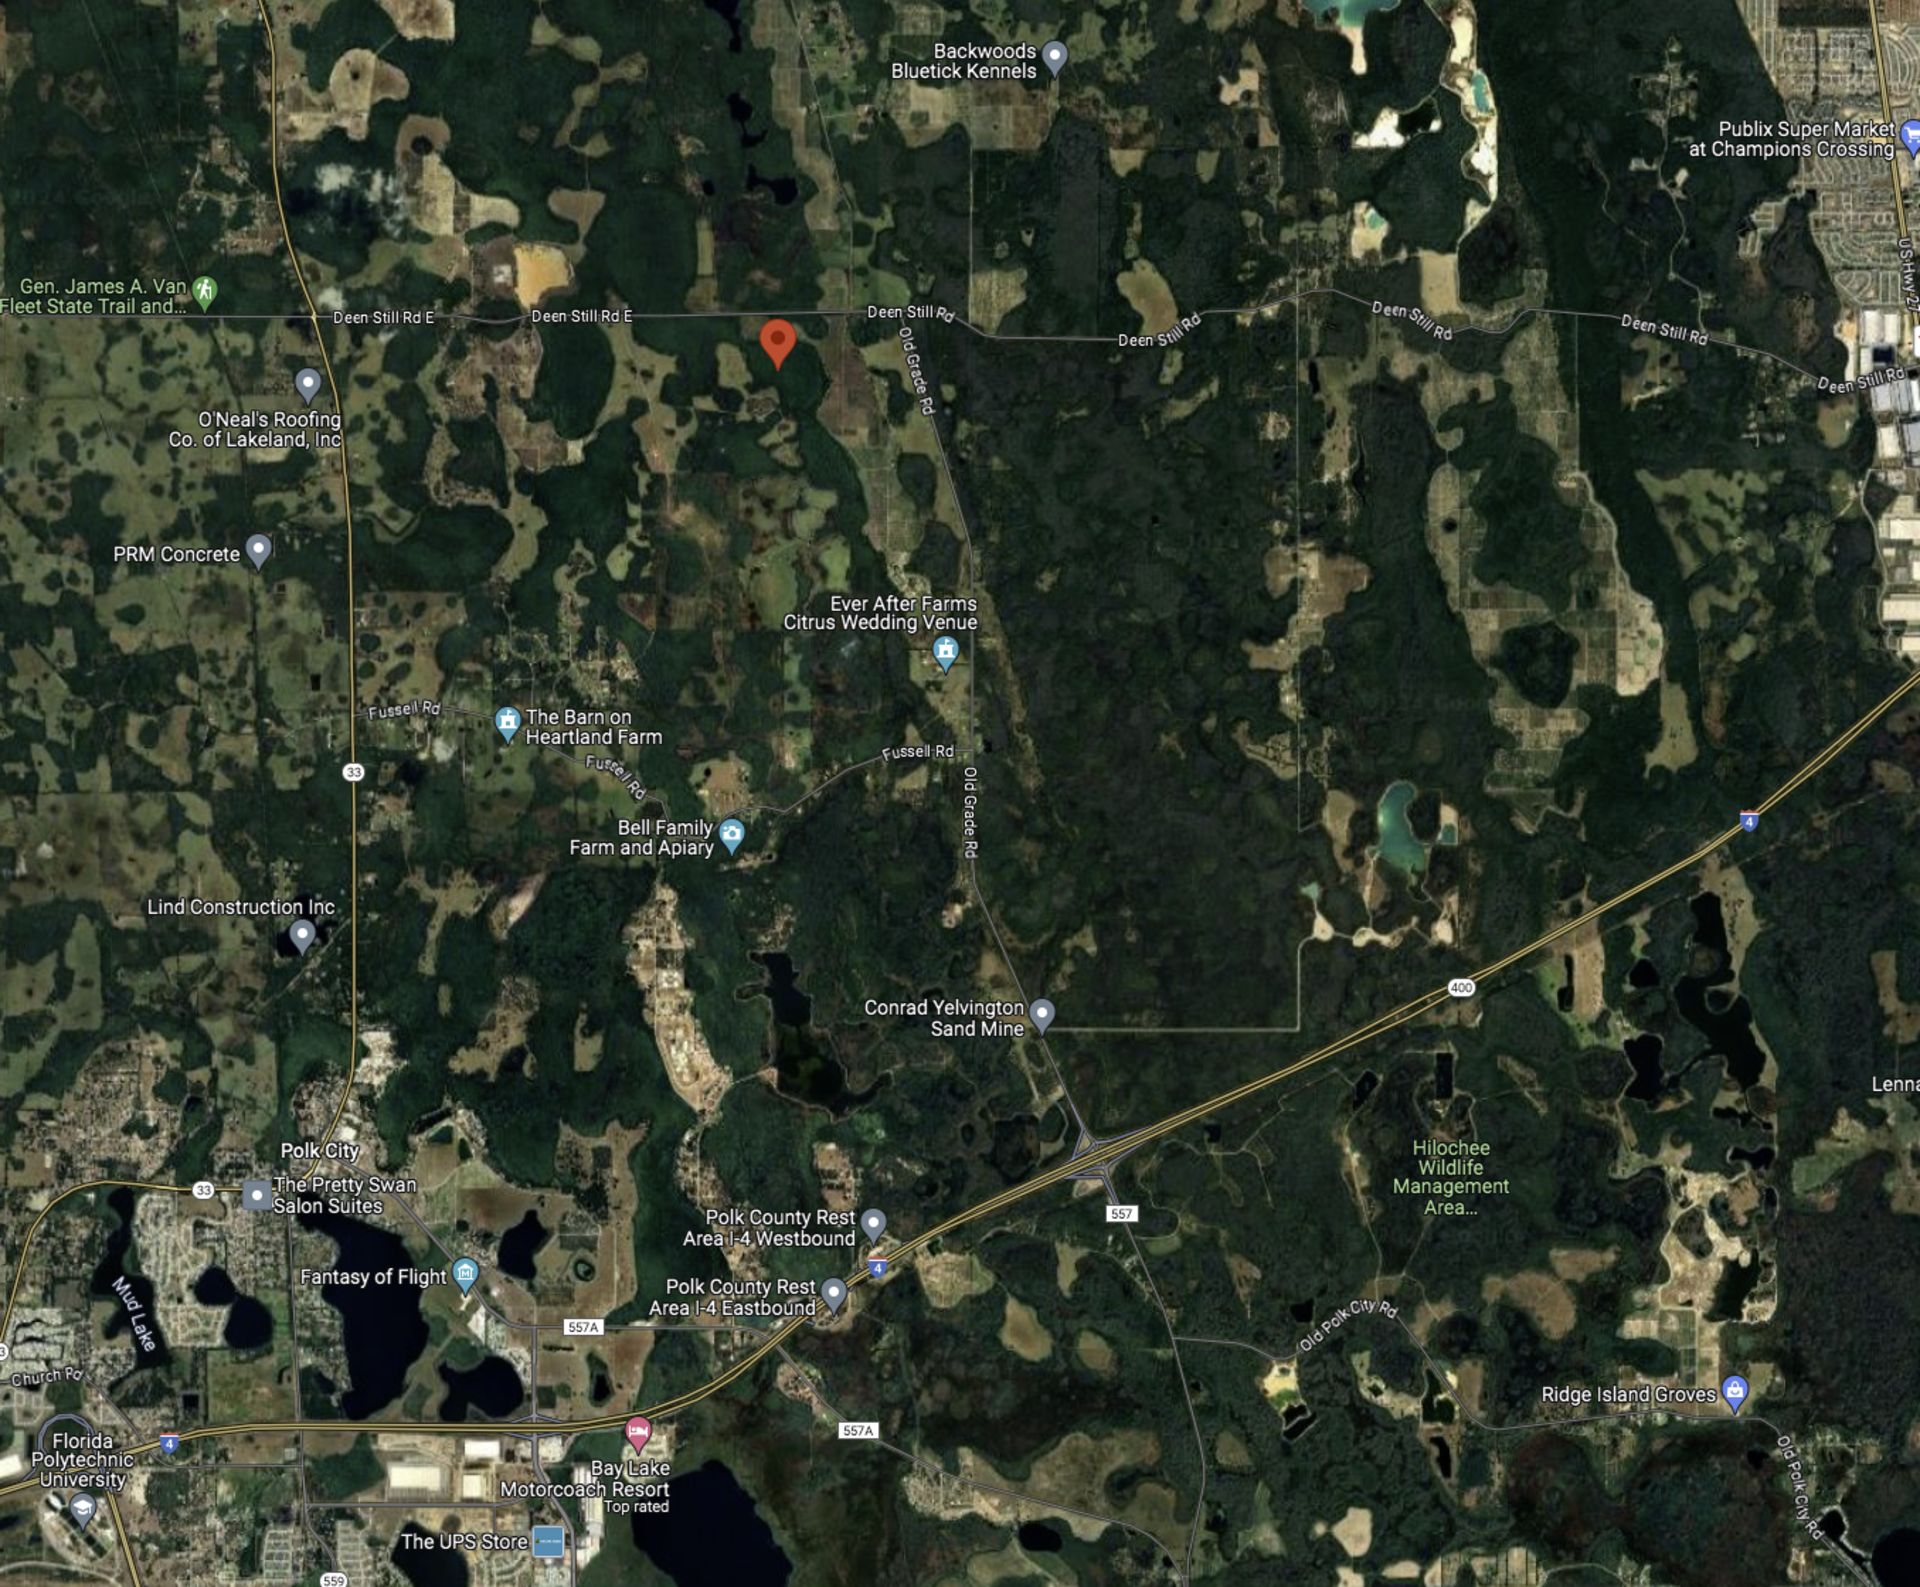 Capture This Investment Opportunity: 1.25 Acres in Polk County, Florida! - Image 10 of 10